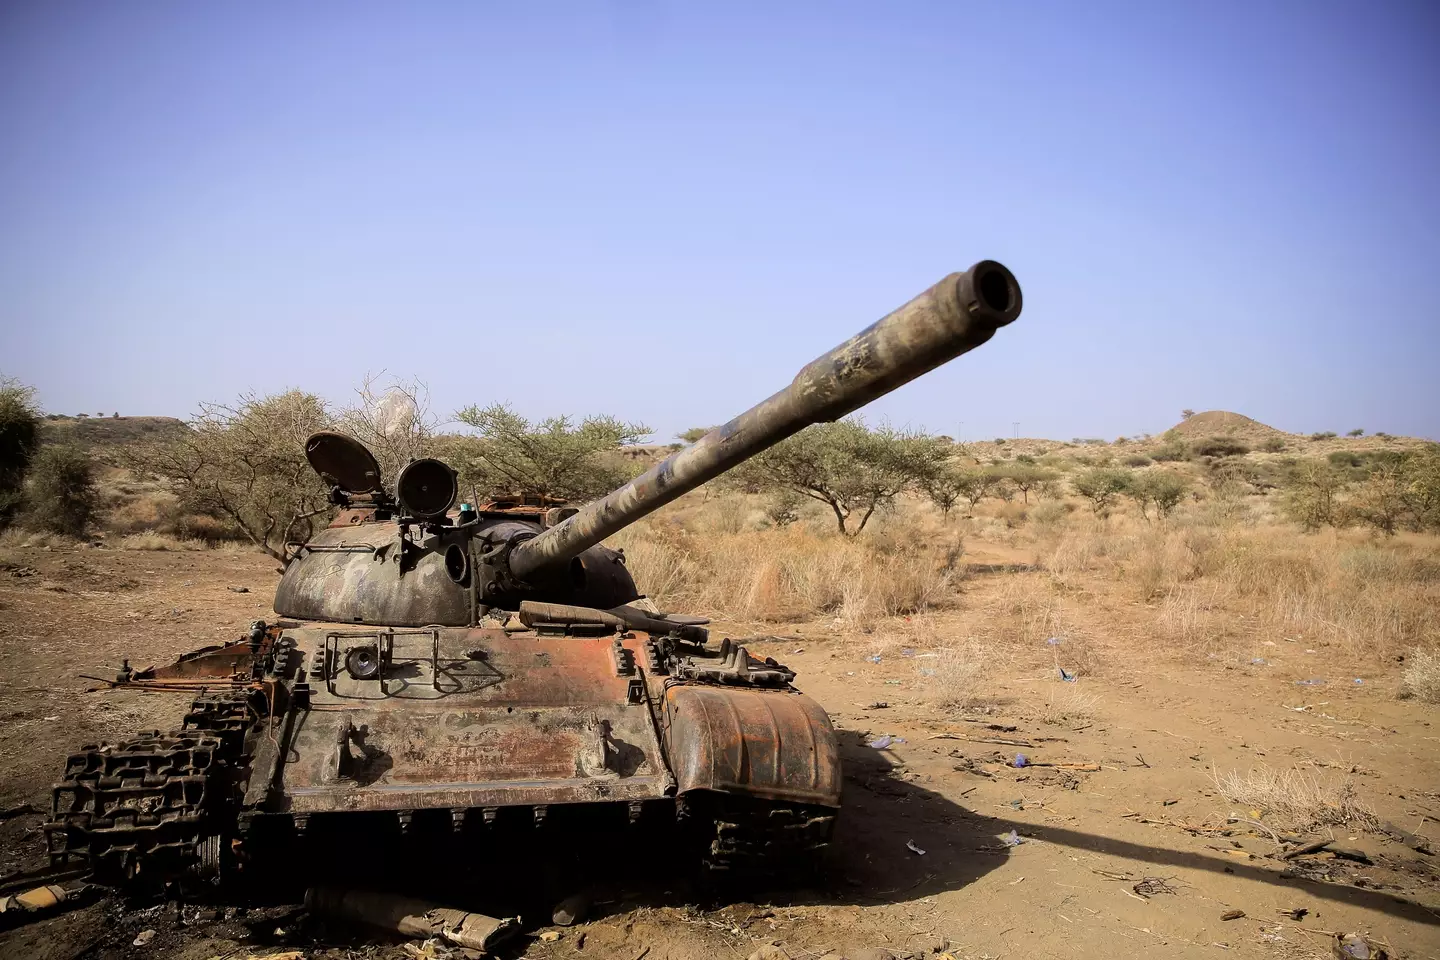 A destroyed tank is seen in a field in the aftermath of fighting between the Ethiopian National Defence Force (ENDF) and the Tigray People's Liberation Front (TPLF) forces.